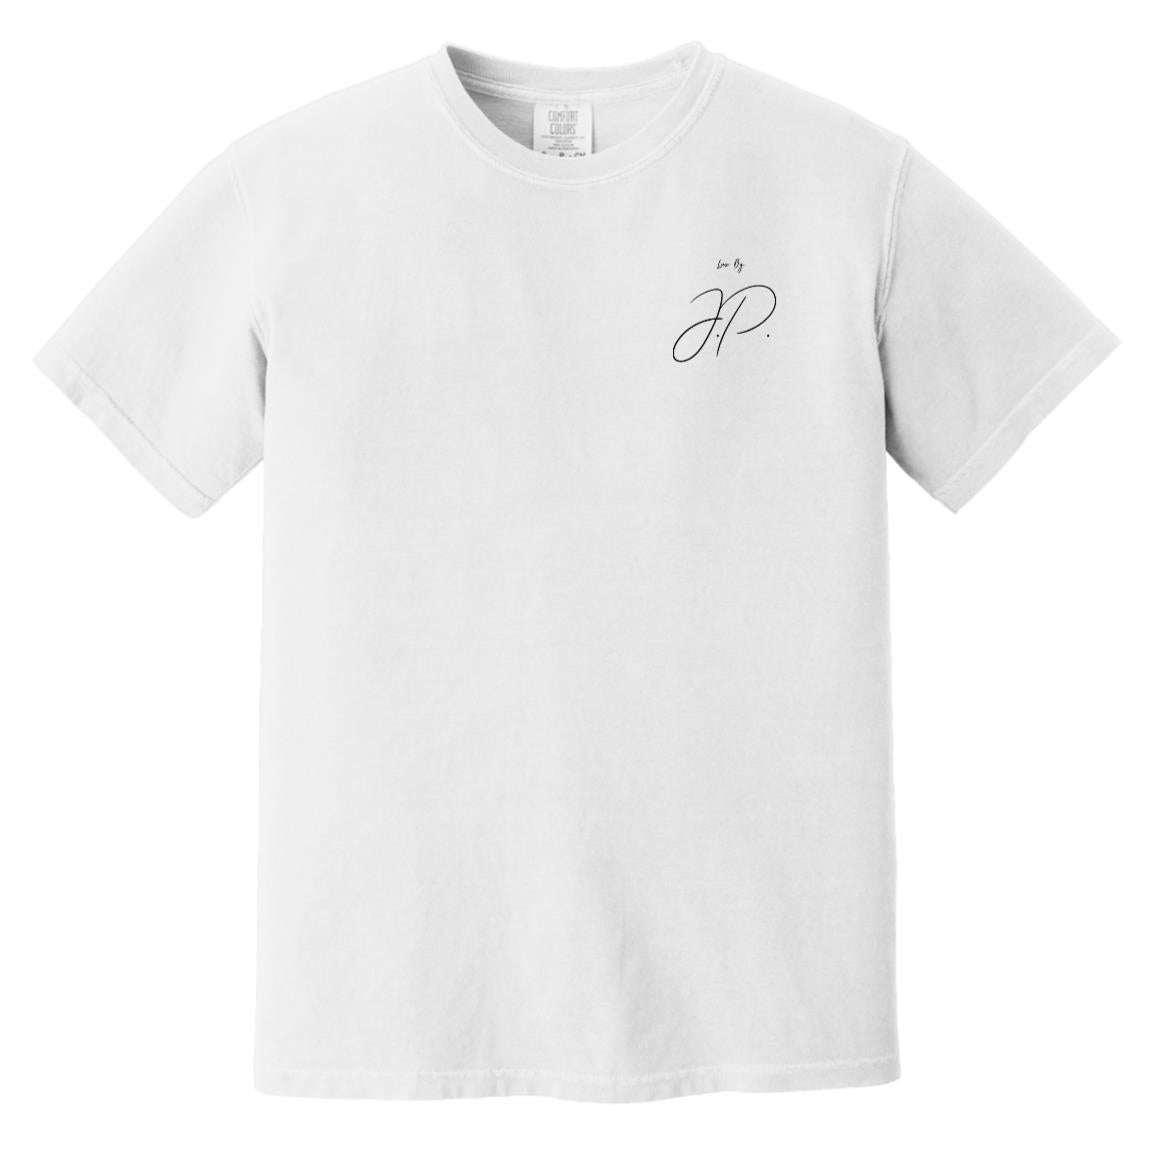 Lux. Heavyweight T-Shirt - White- Colors Edition